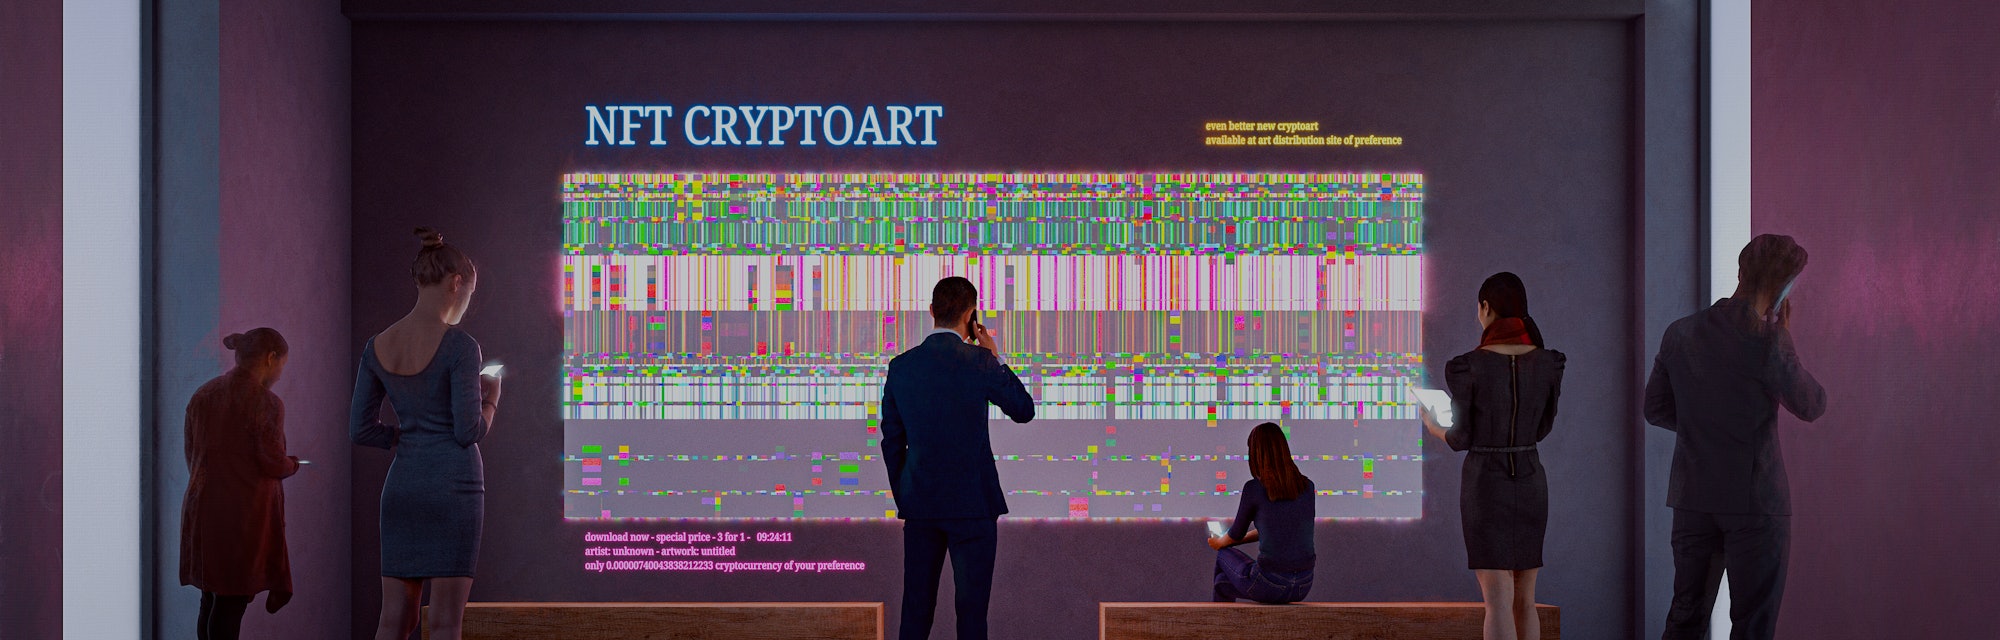 NFT CryptoArt display in art gallery with people using smart phones and digital tablets. Entrirely 3...